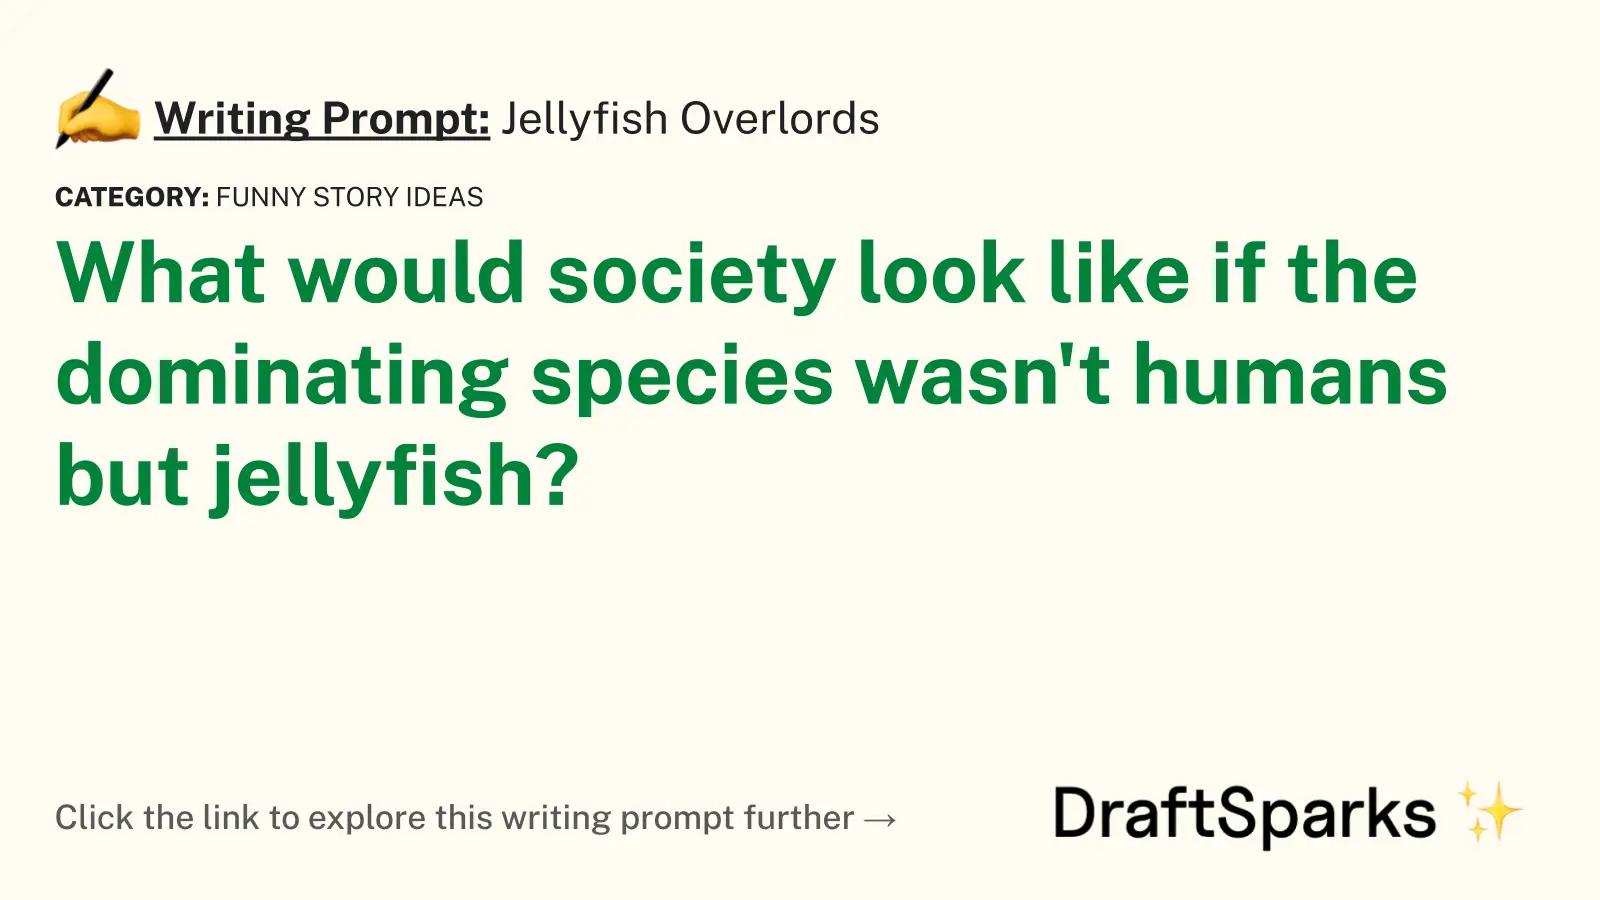 Jellyfish Overlords